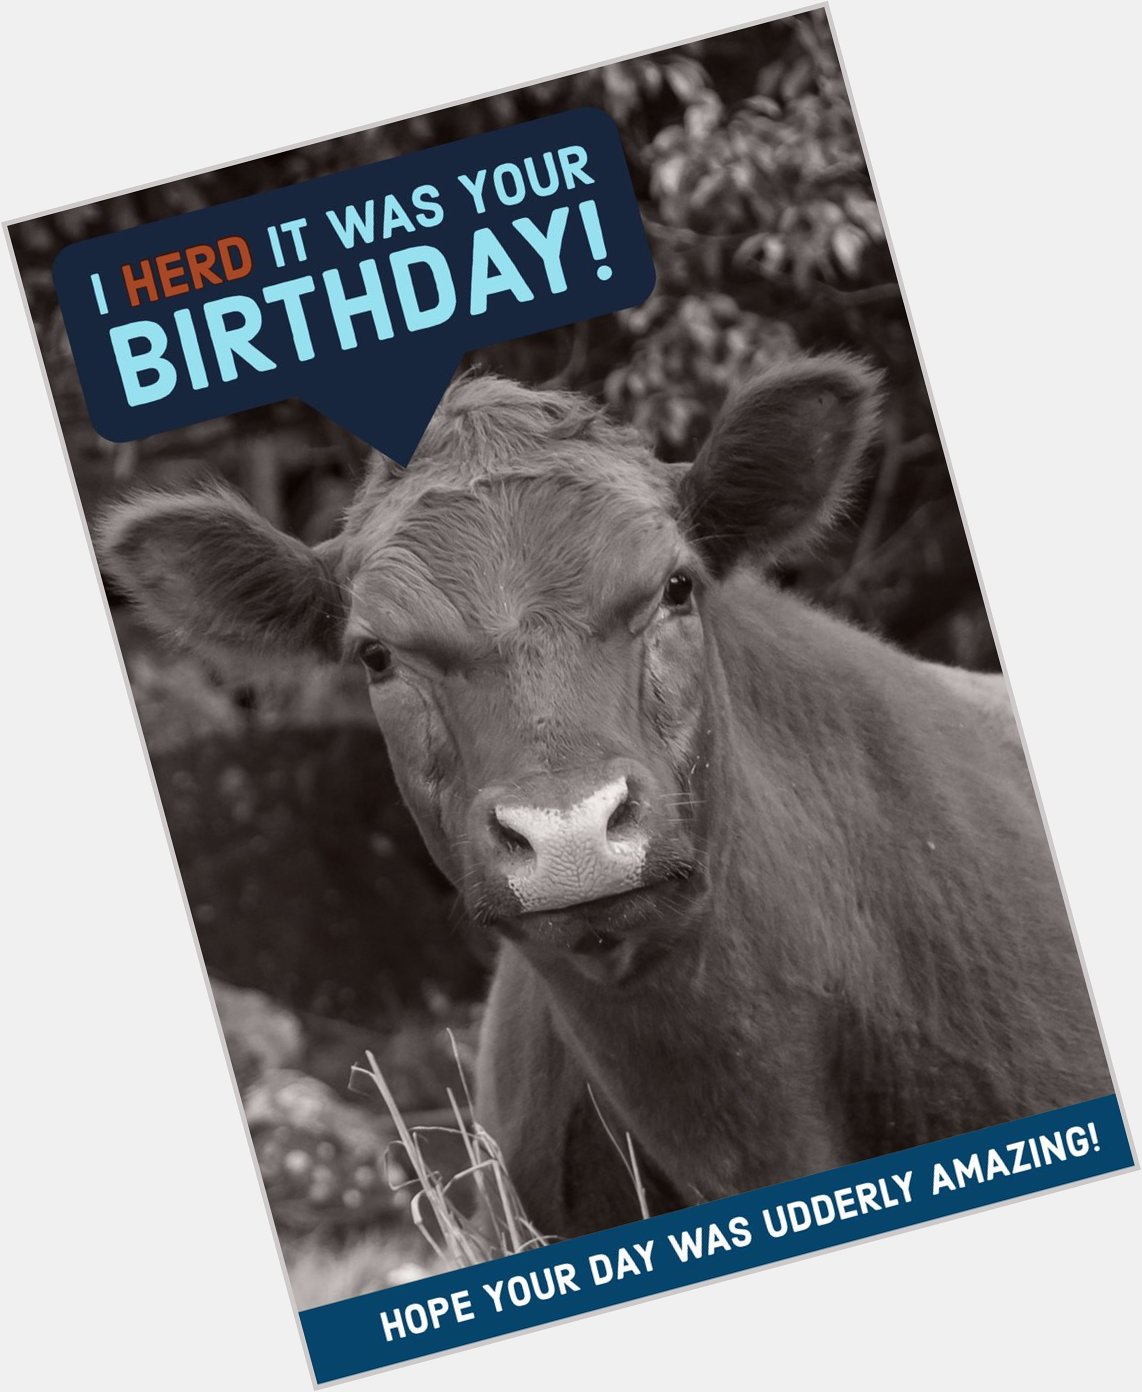 Happy belated 21st birthday to our very own, Katie Price! We hope your day was full of fun, laughter, and COWS. 